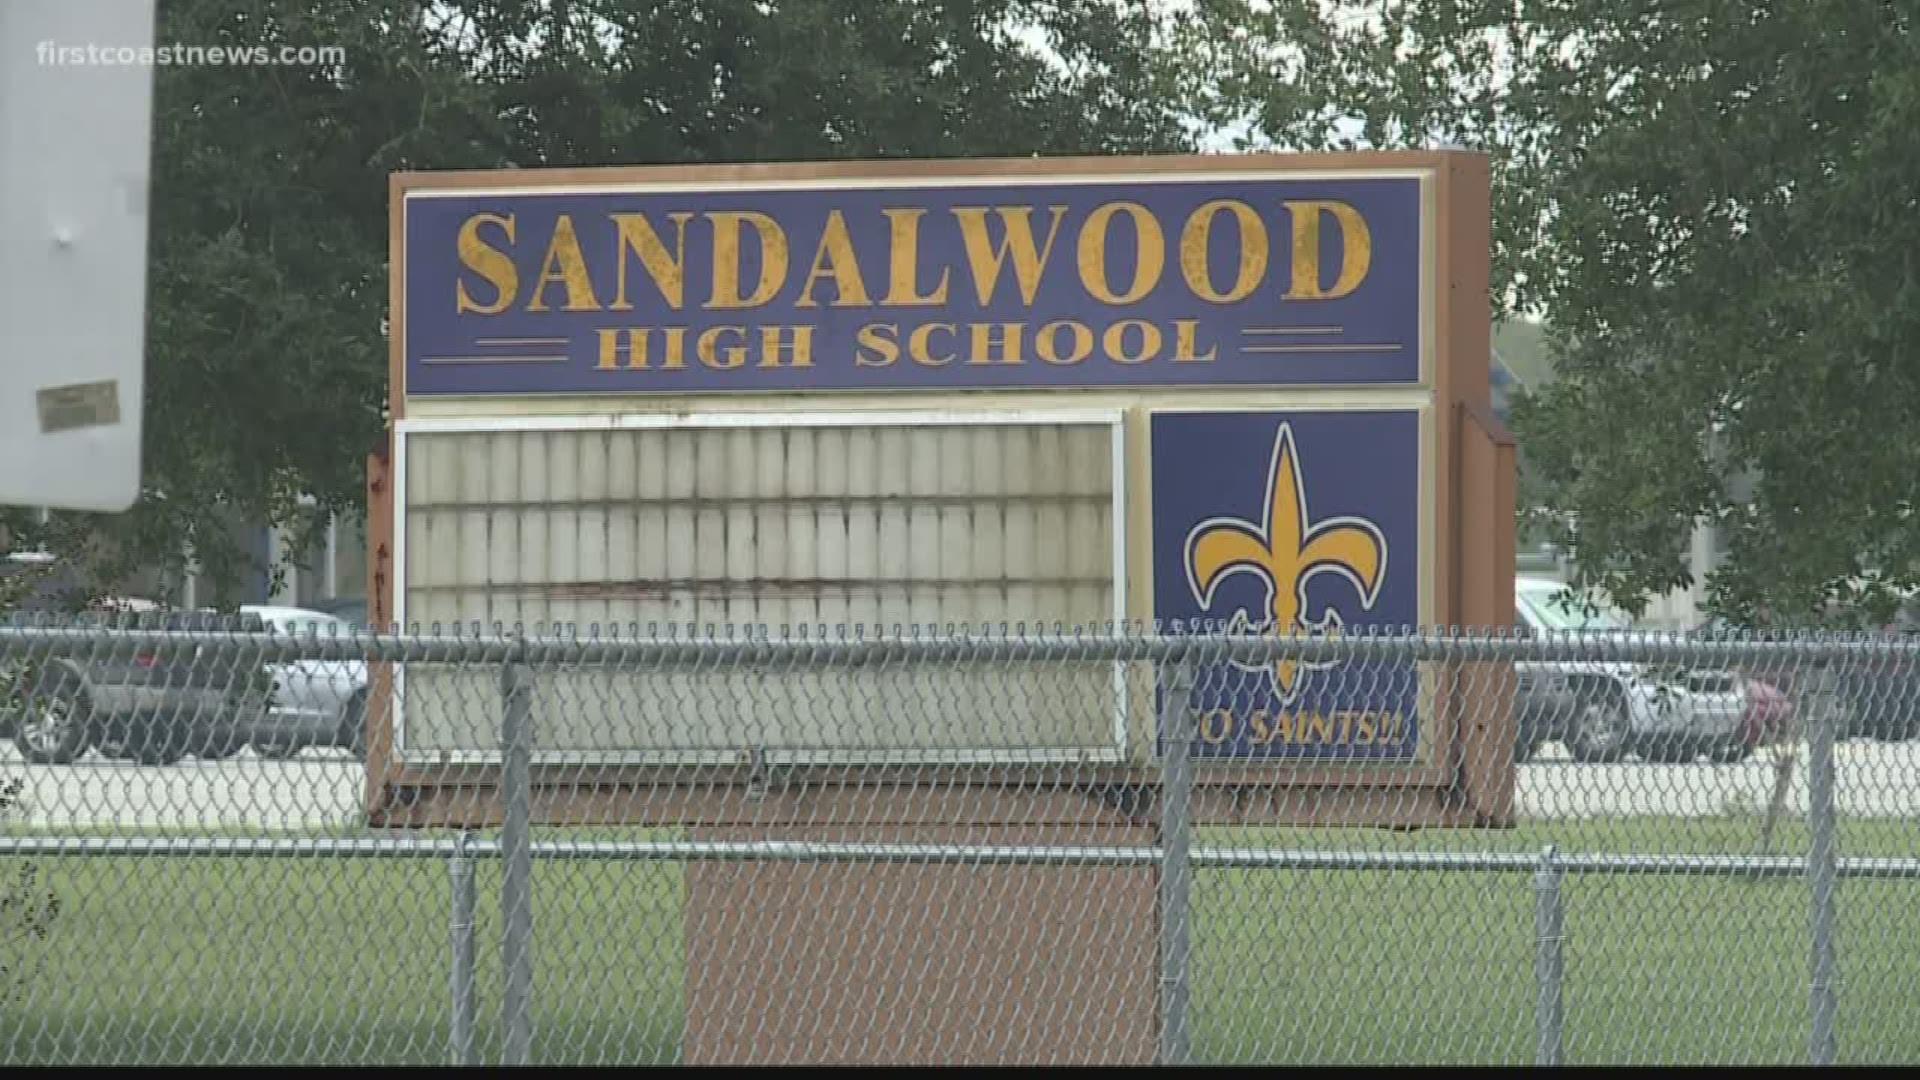 The lockdowns for Sandalwood High School was lifted hours after it went on lockdown due to police activity in the area.